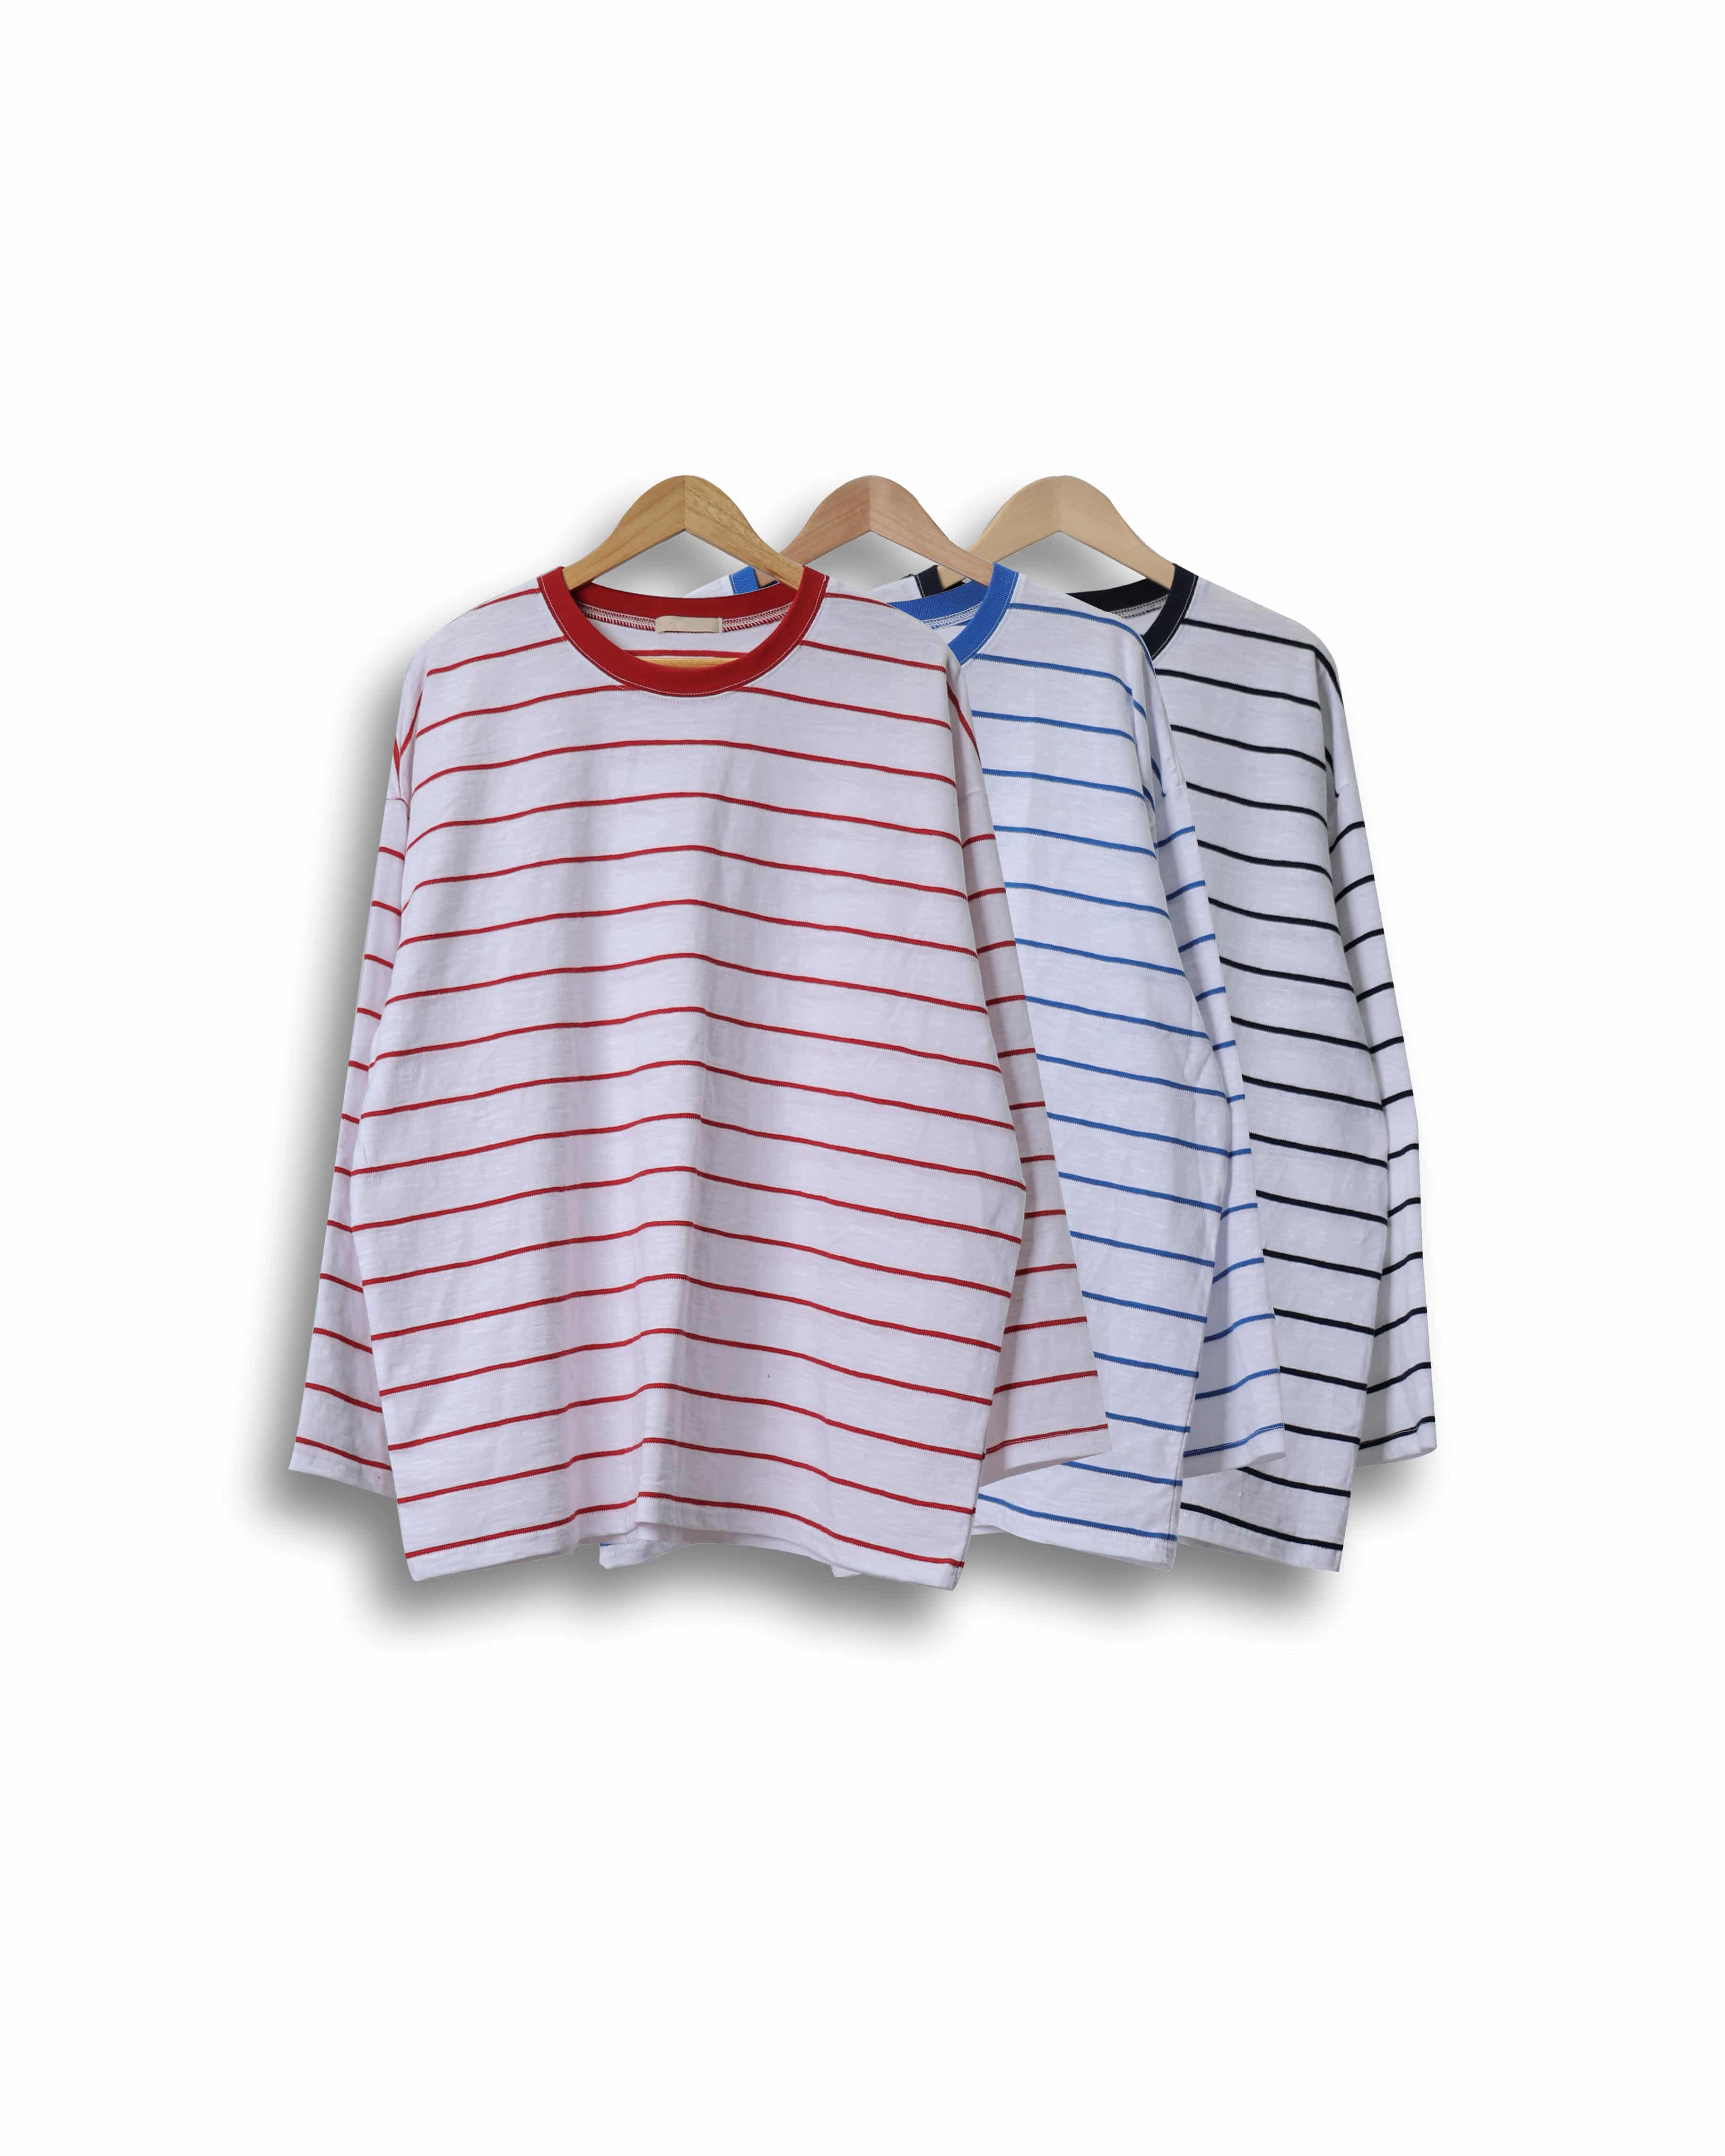 SPRY Marin Pin Stripe Loose Long Sleeve (Navy/Blue/Red)